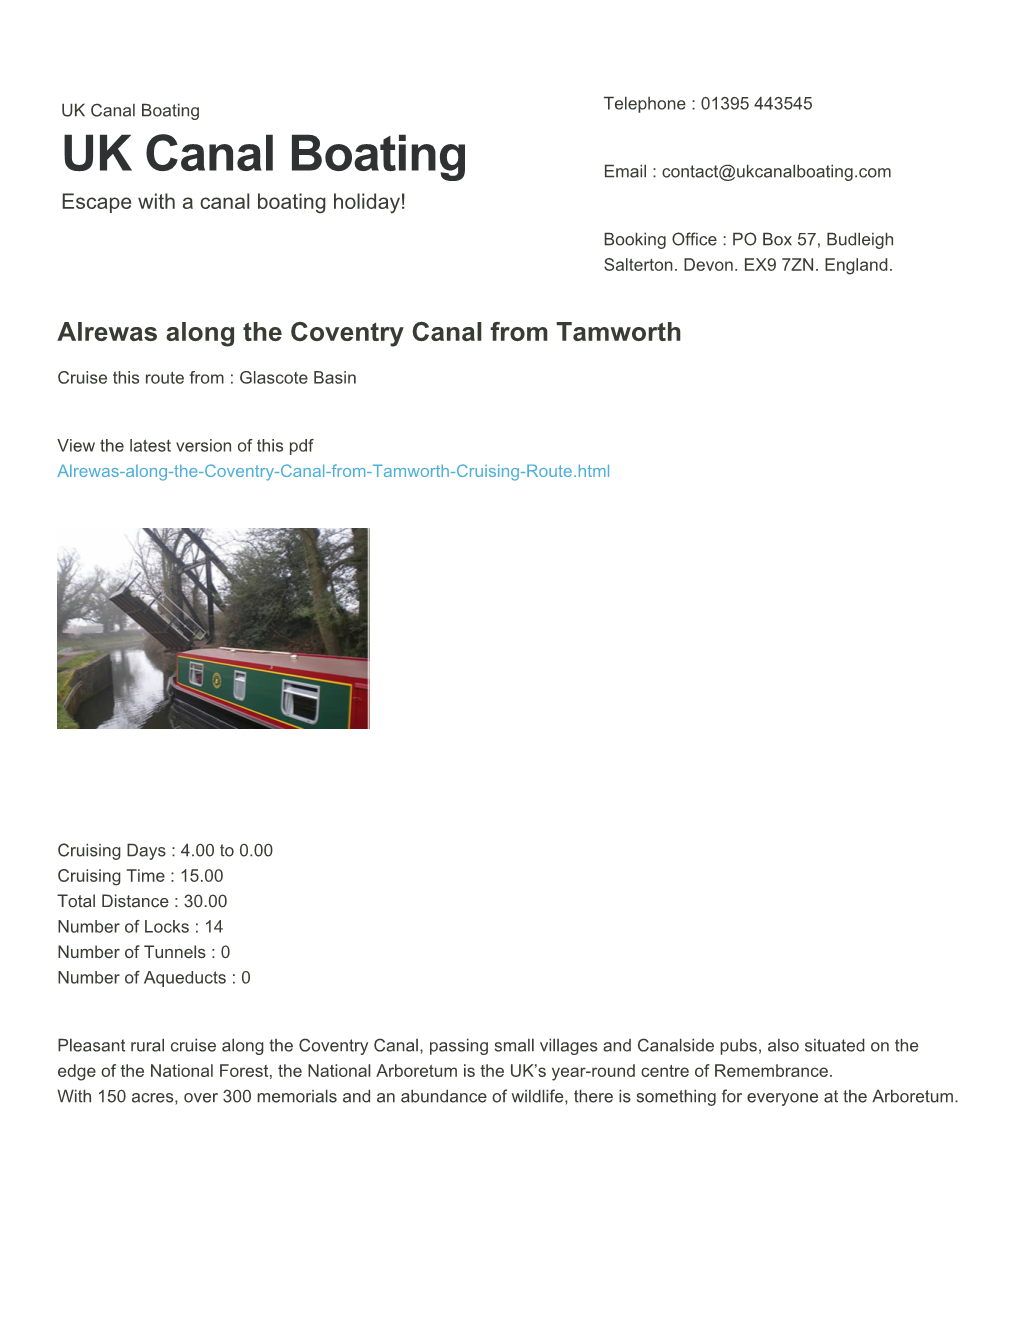 Alrewas Along the Coventry Canal from Tamworth | UK Canal Boating